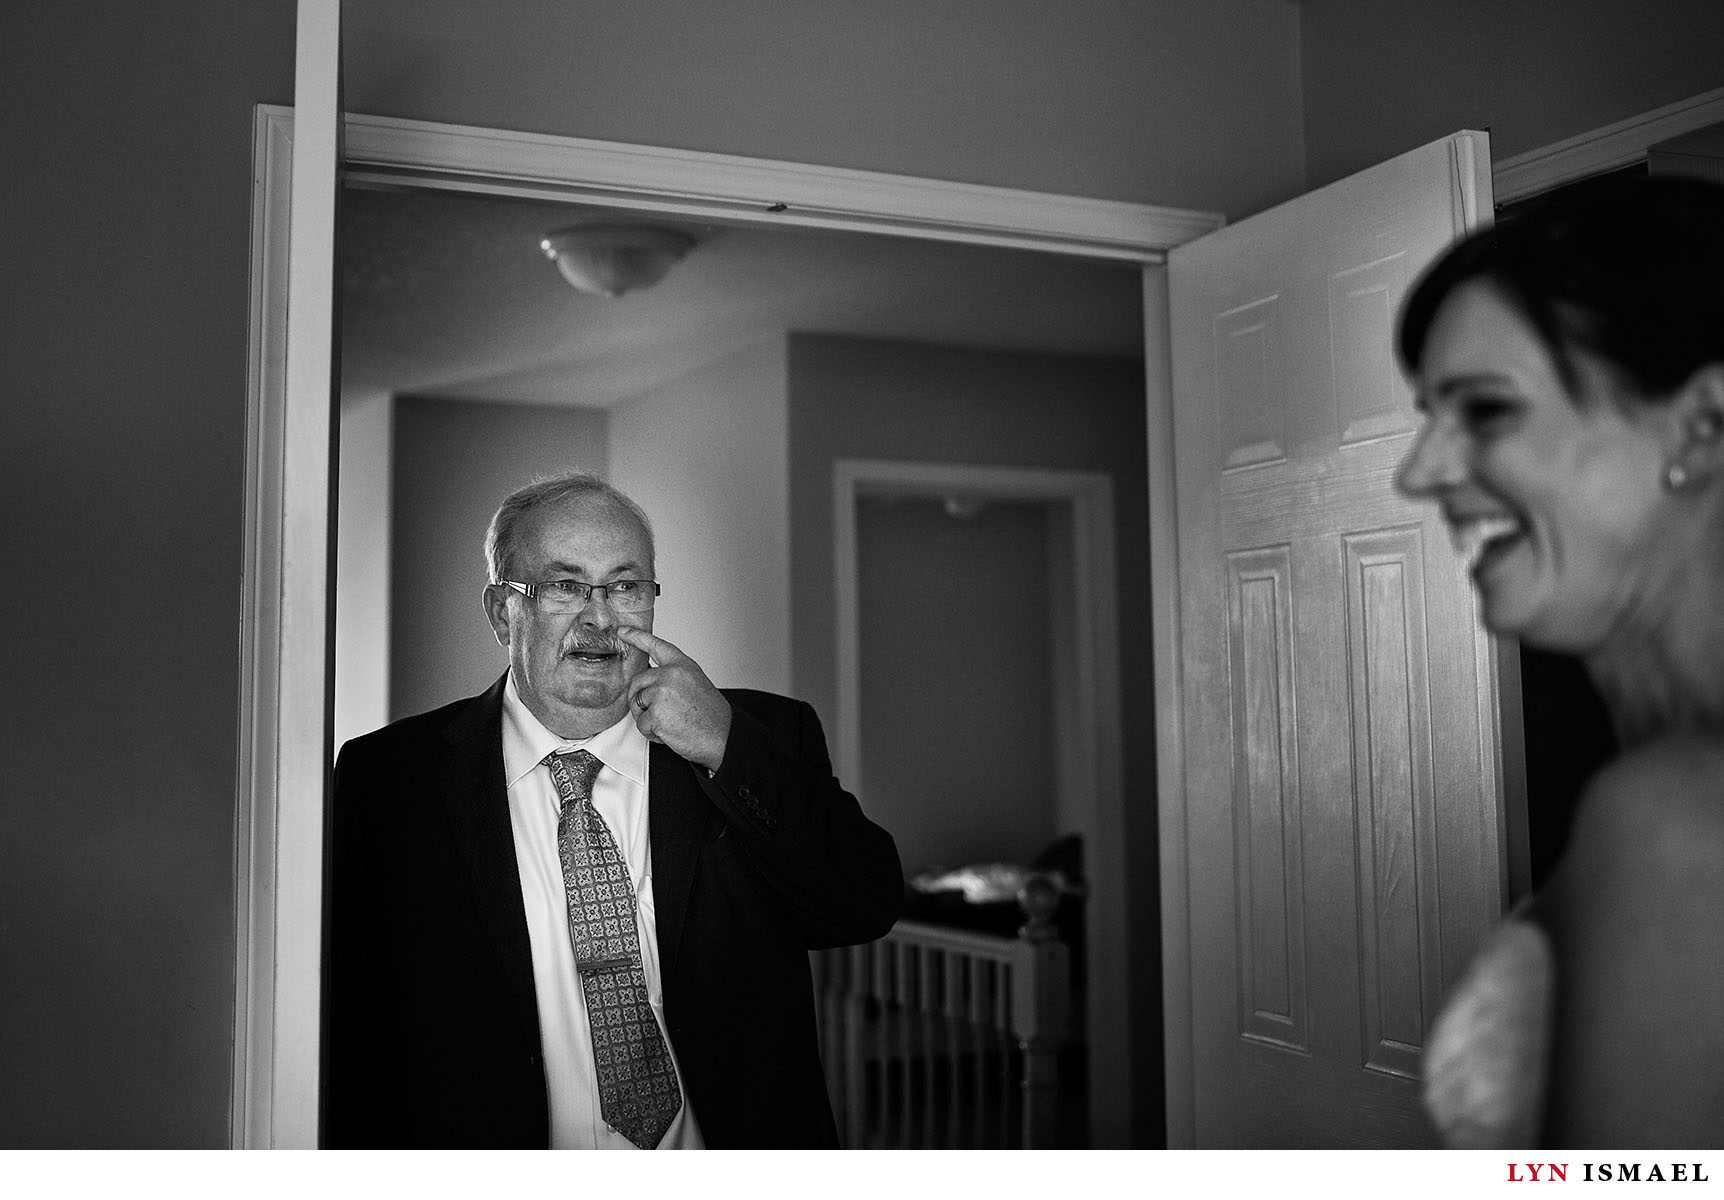 The father of the bride gets emotional upon seeing his daughter as a bride for the first time.